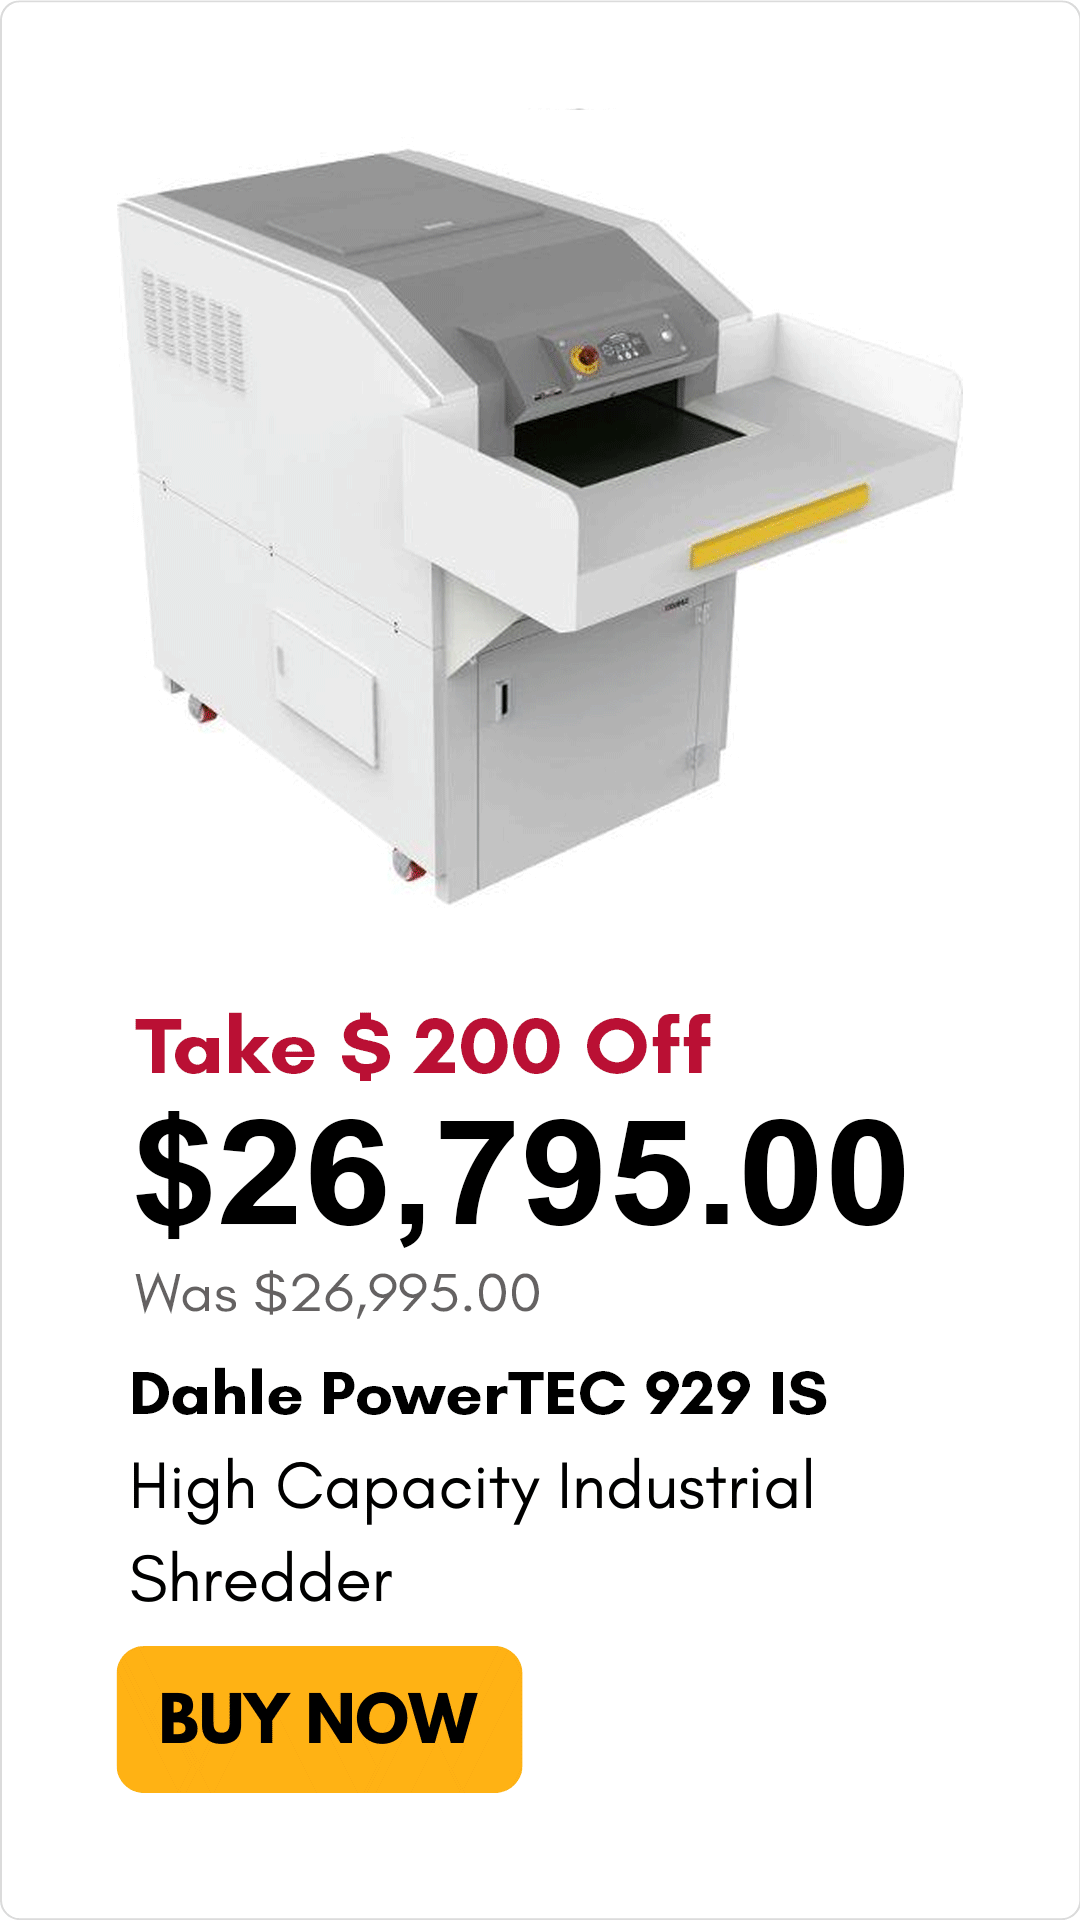 Dahle PowerTEC 929 IS High Capacity Level P-3 Industrial Shredder on sale for $200 off